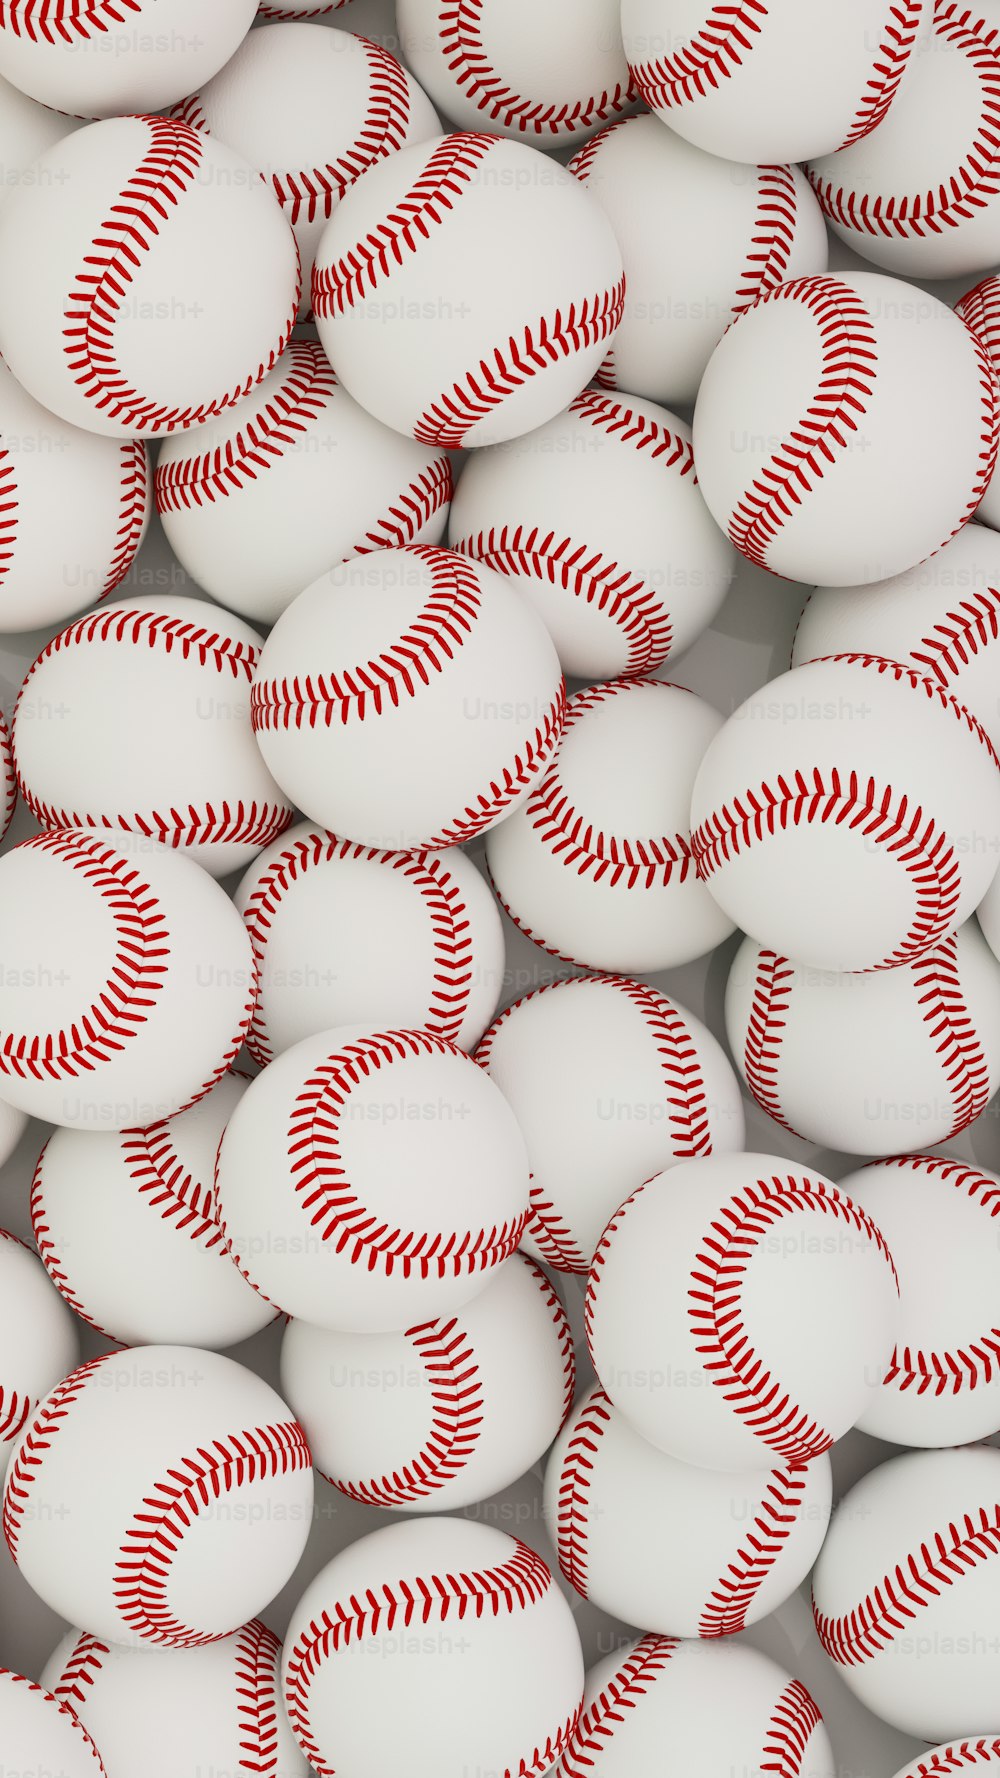 a bunch of baseballs that are white and red